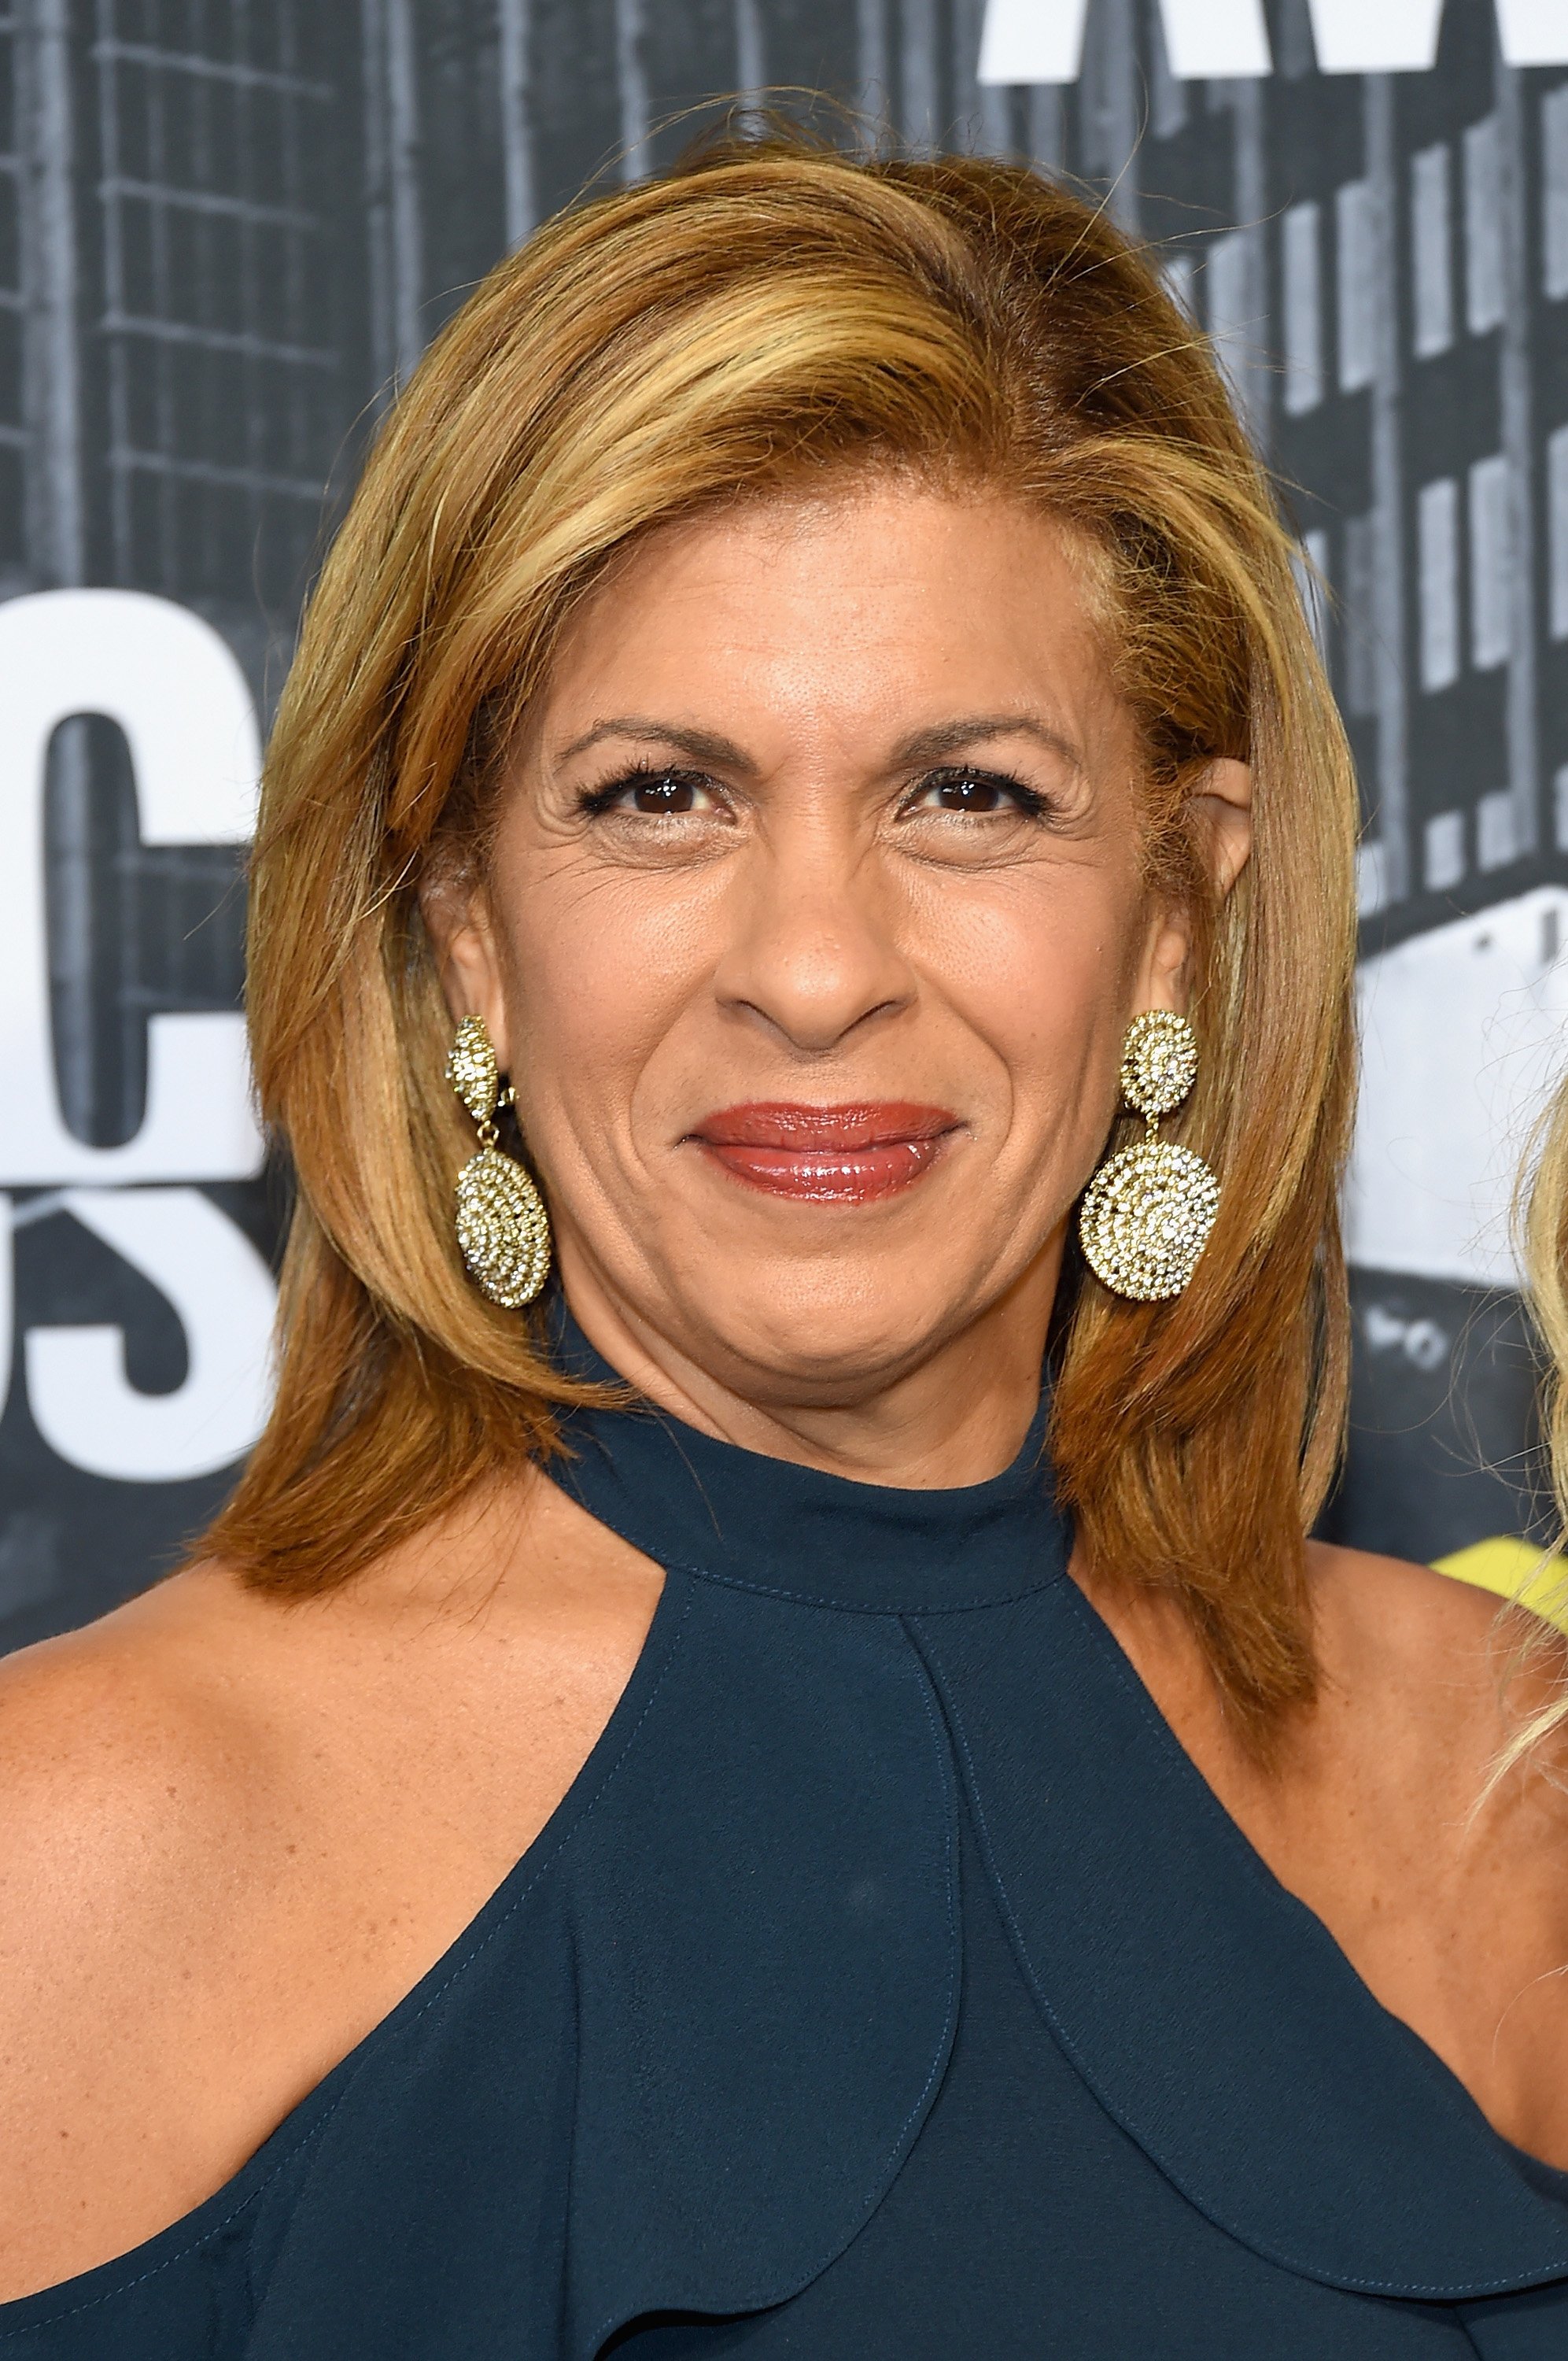 Hoda Kotb photographed at the CMT Music Awards at the Music City Center in Nashville | Source: Getty Images